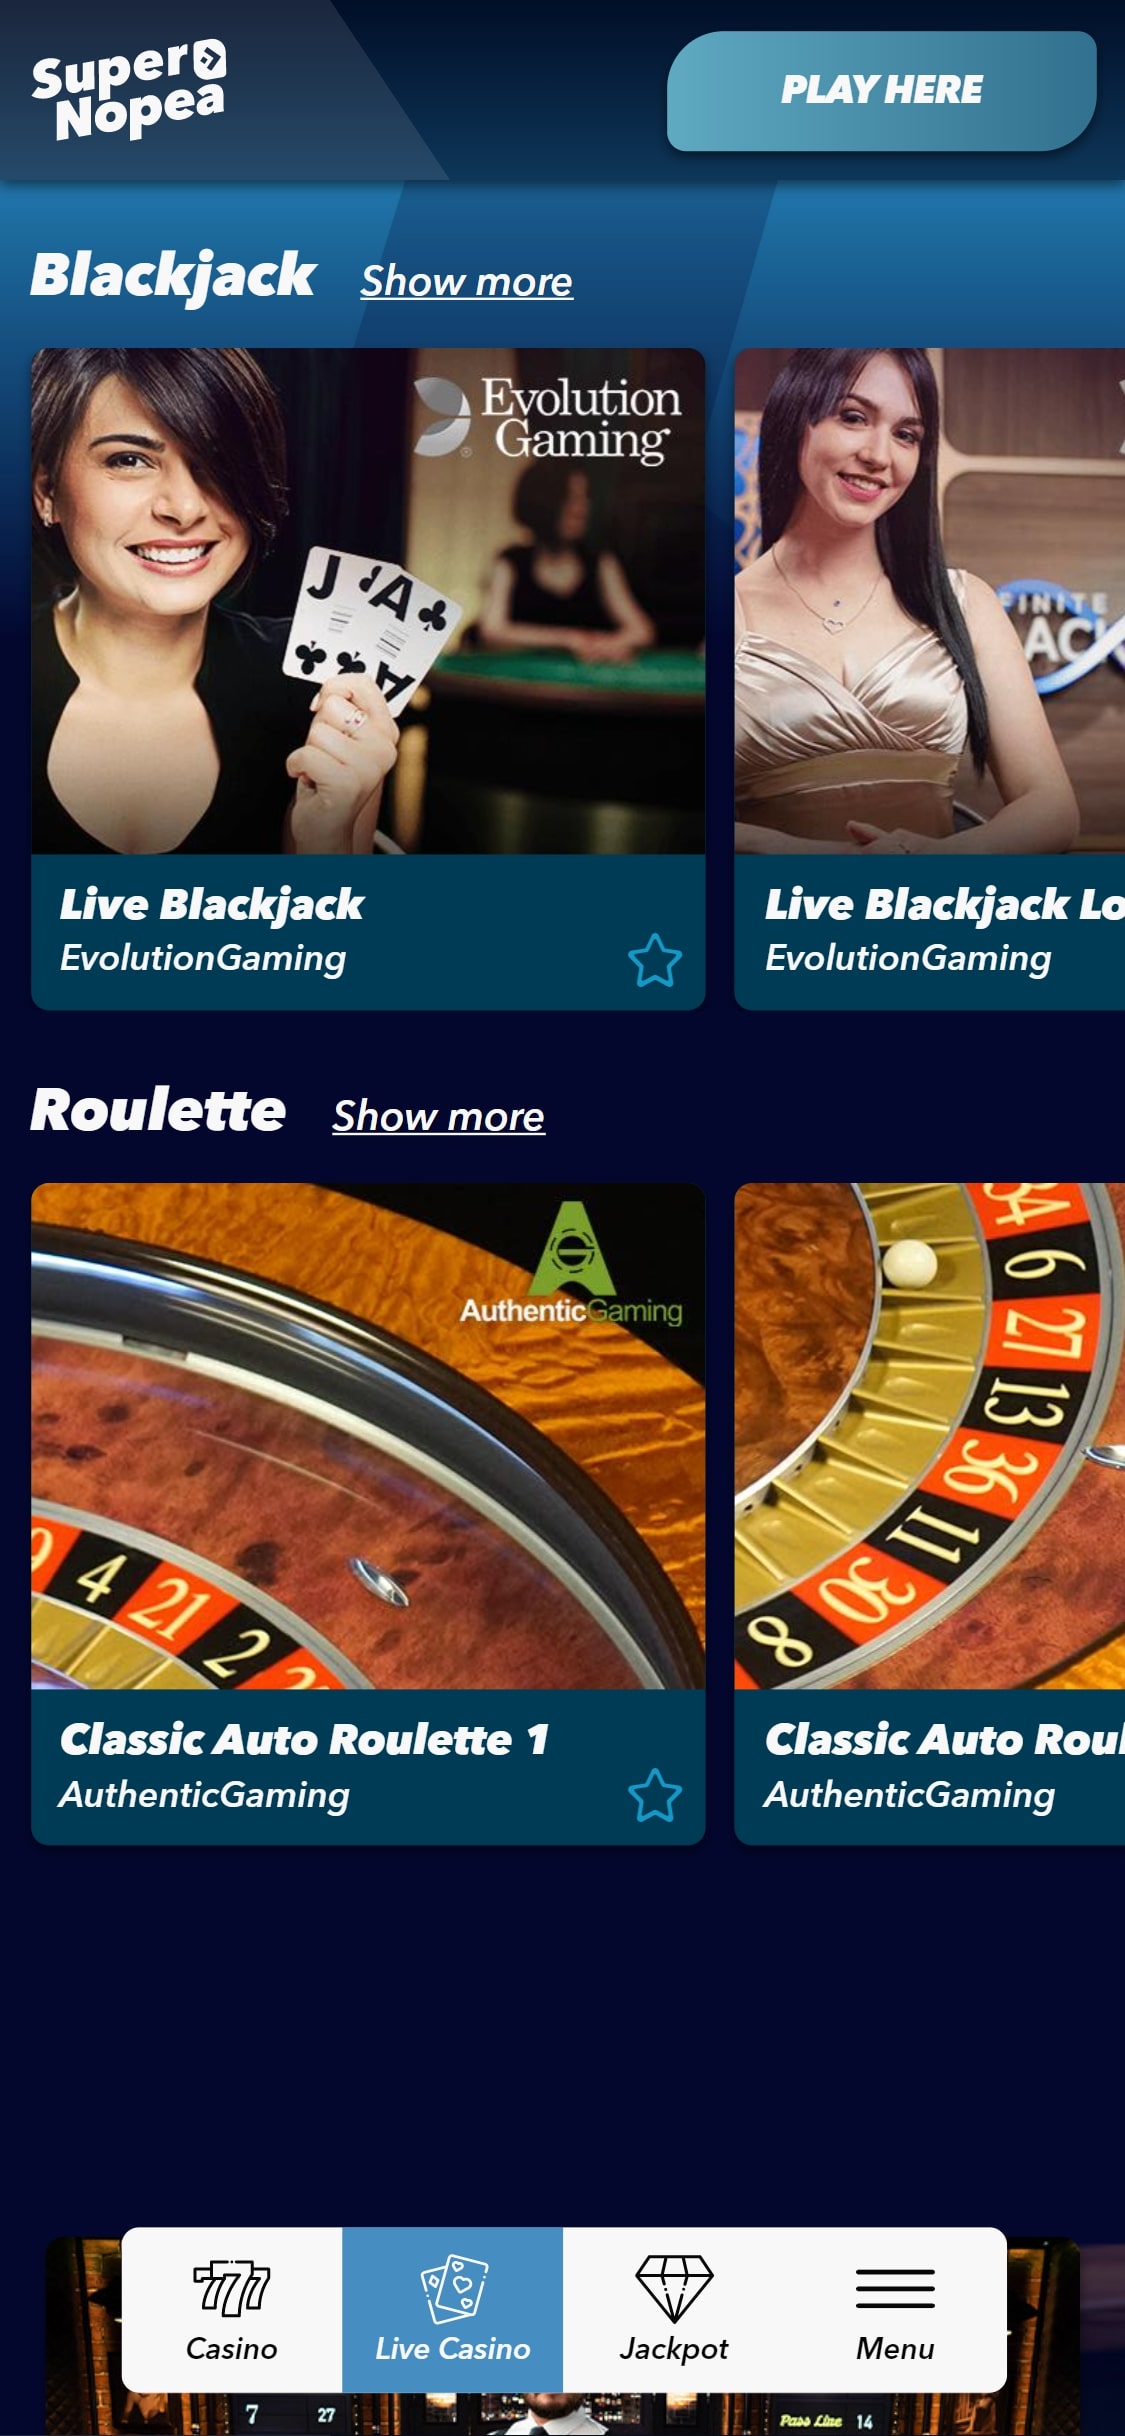 SuperNopea Casino Mobile Live Dealer Games Review